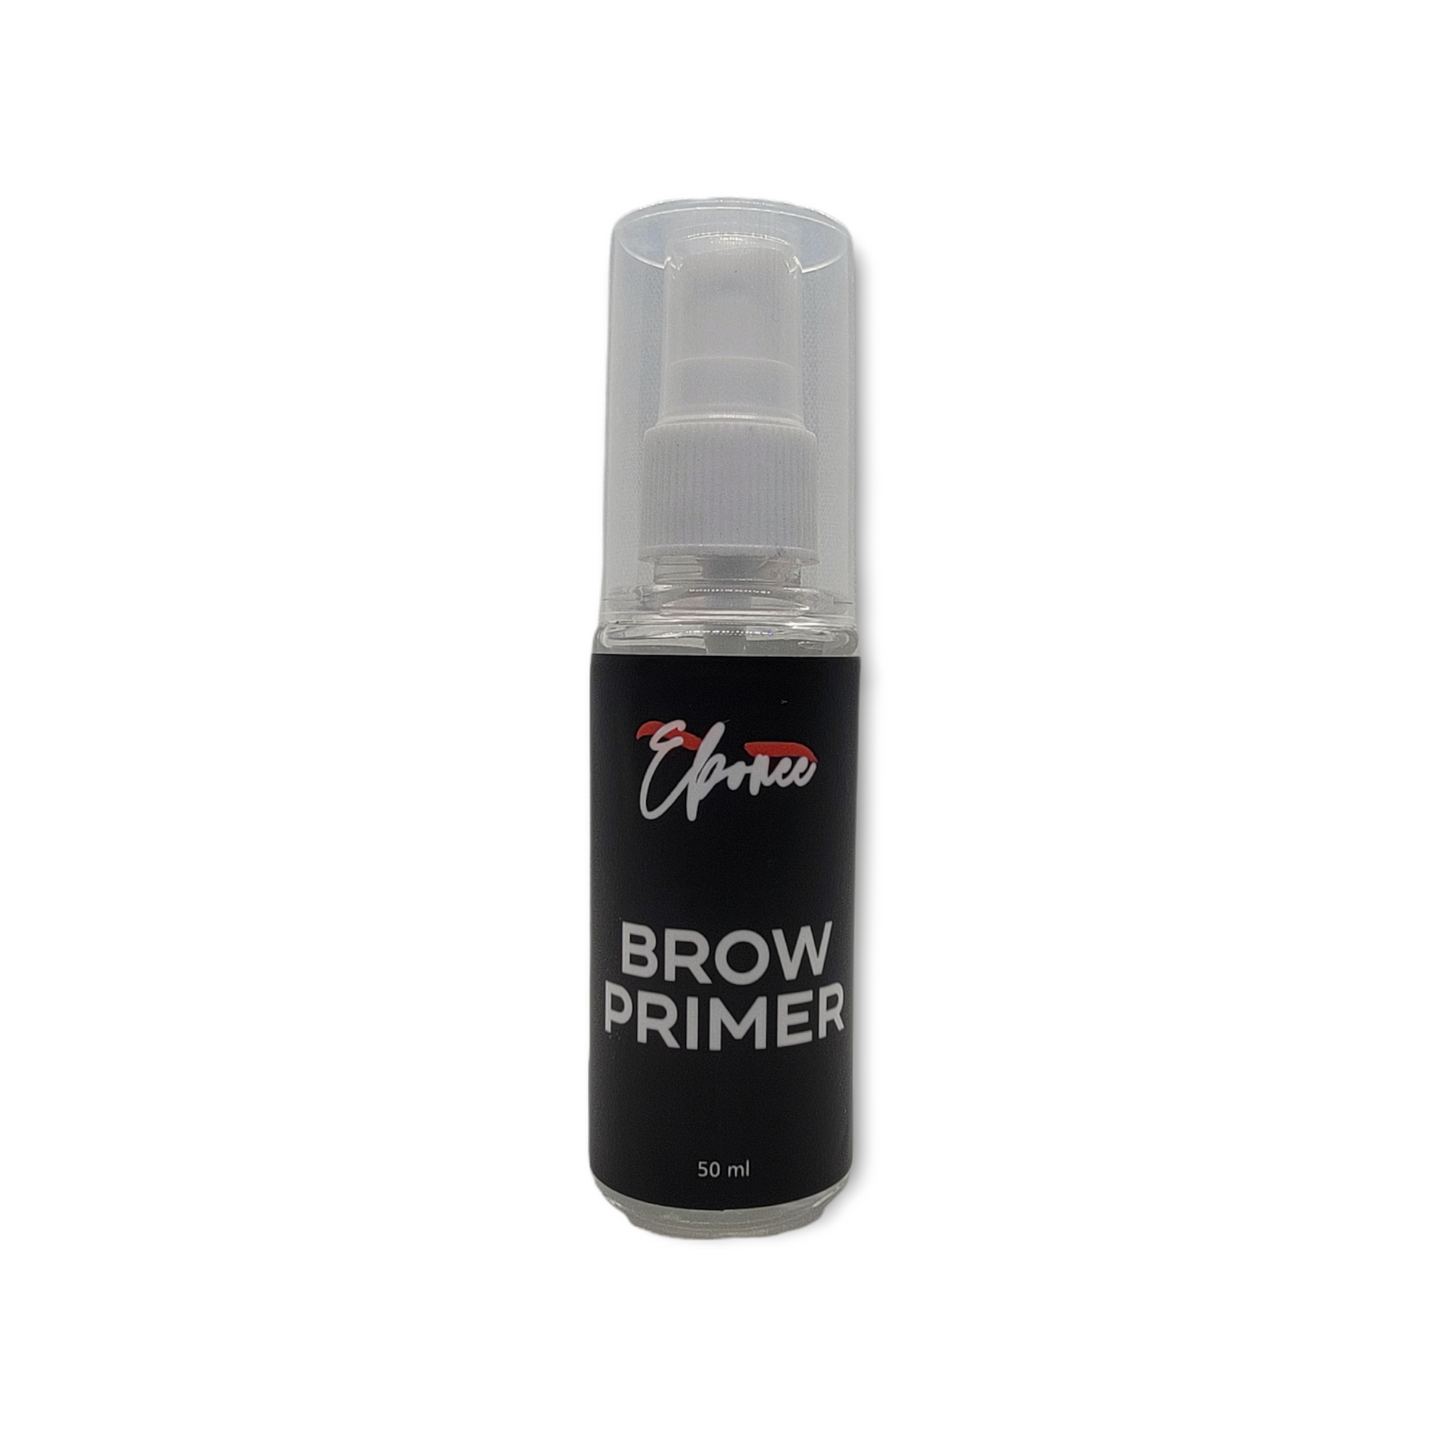 Use Ebonee BROW PRIMER to prepare eyebrows before applying the other brow products including henna.  Instructions:  Spray the primer twice on the eyebrows making sure that the entire length of the eyebrow is covered; wipe off the eyebrows with cotton so that the complete area around the eyebrows gets cleaned. Ebonee Brow Kit, Brow Henna Kit, Makeup Kit, Beautiful, Makeup, Brow Art, Brow Kit, Ebony Brow Kit.